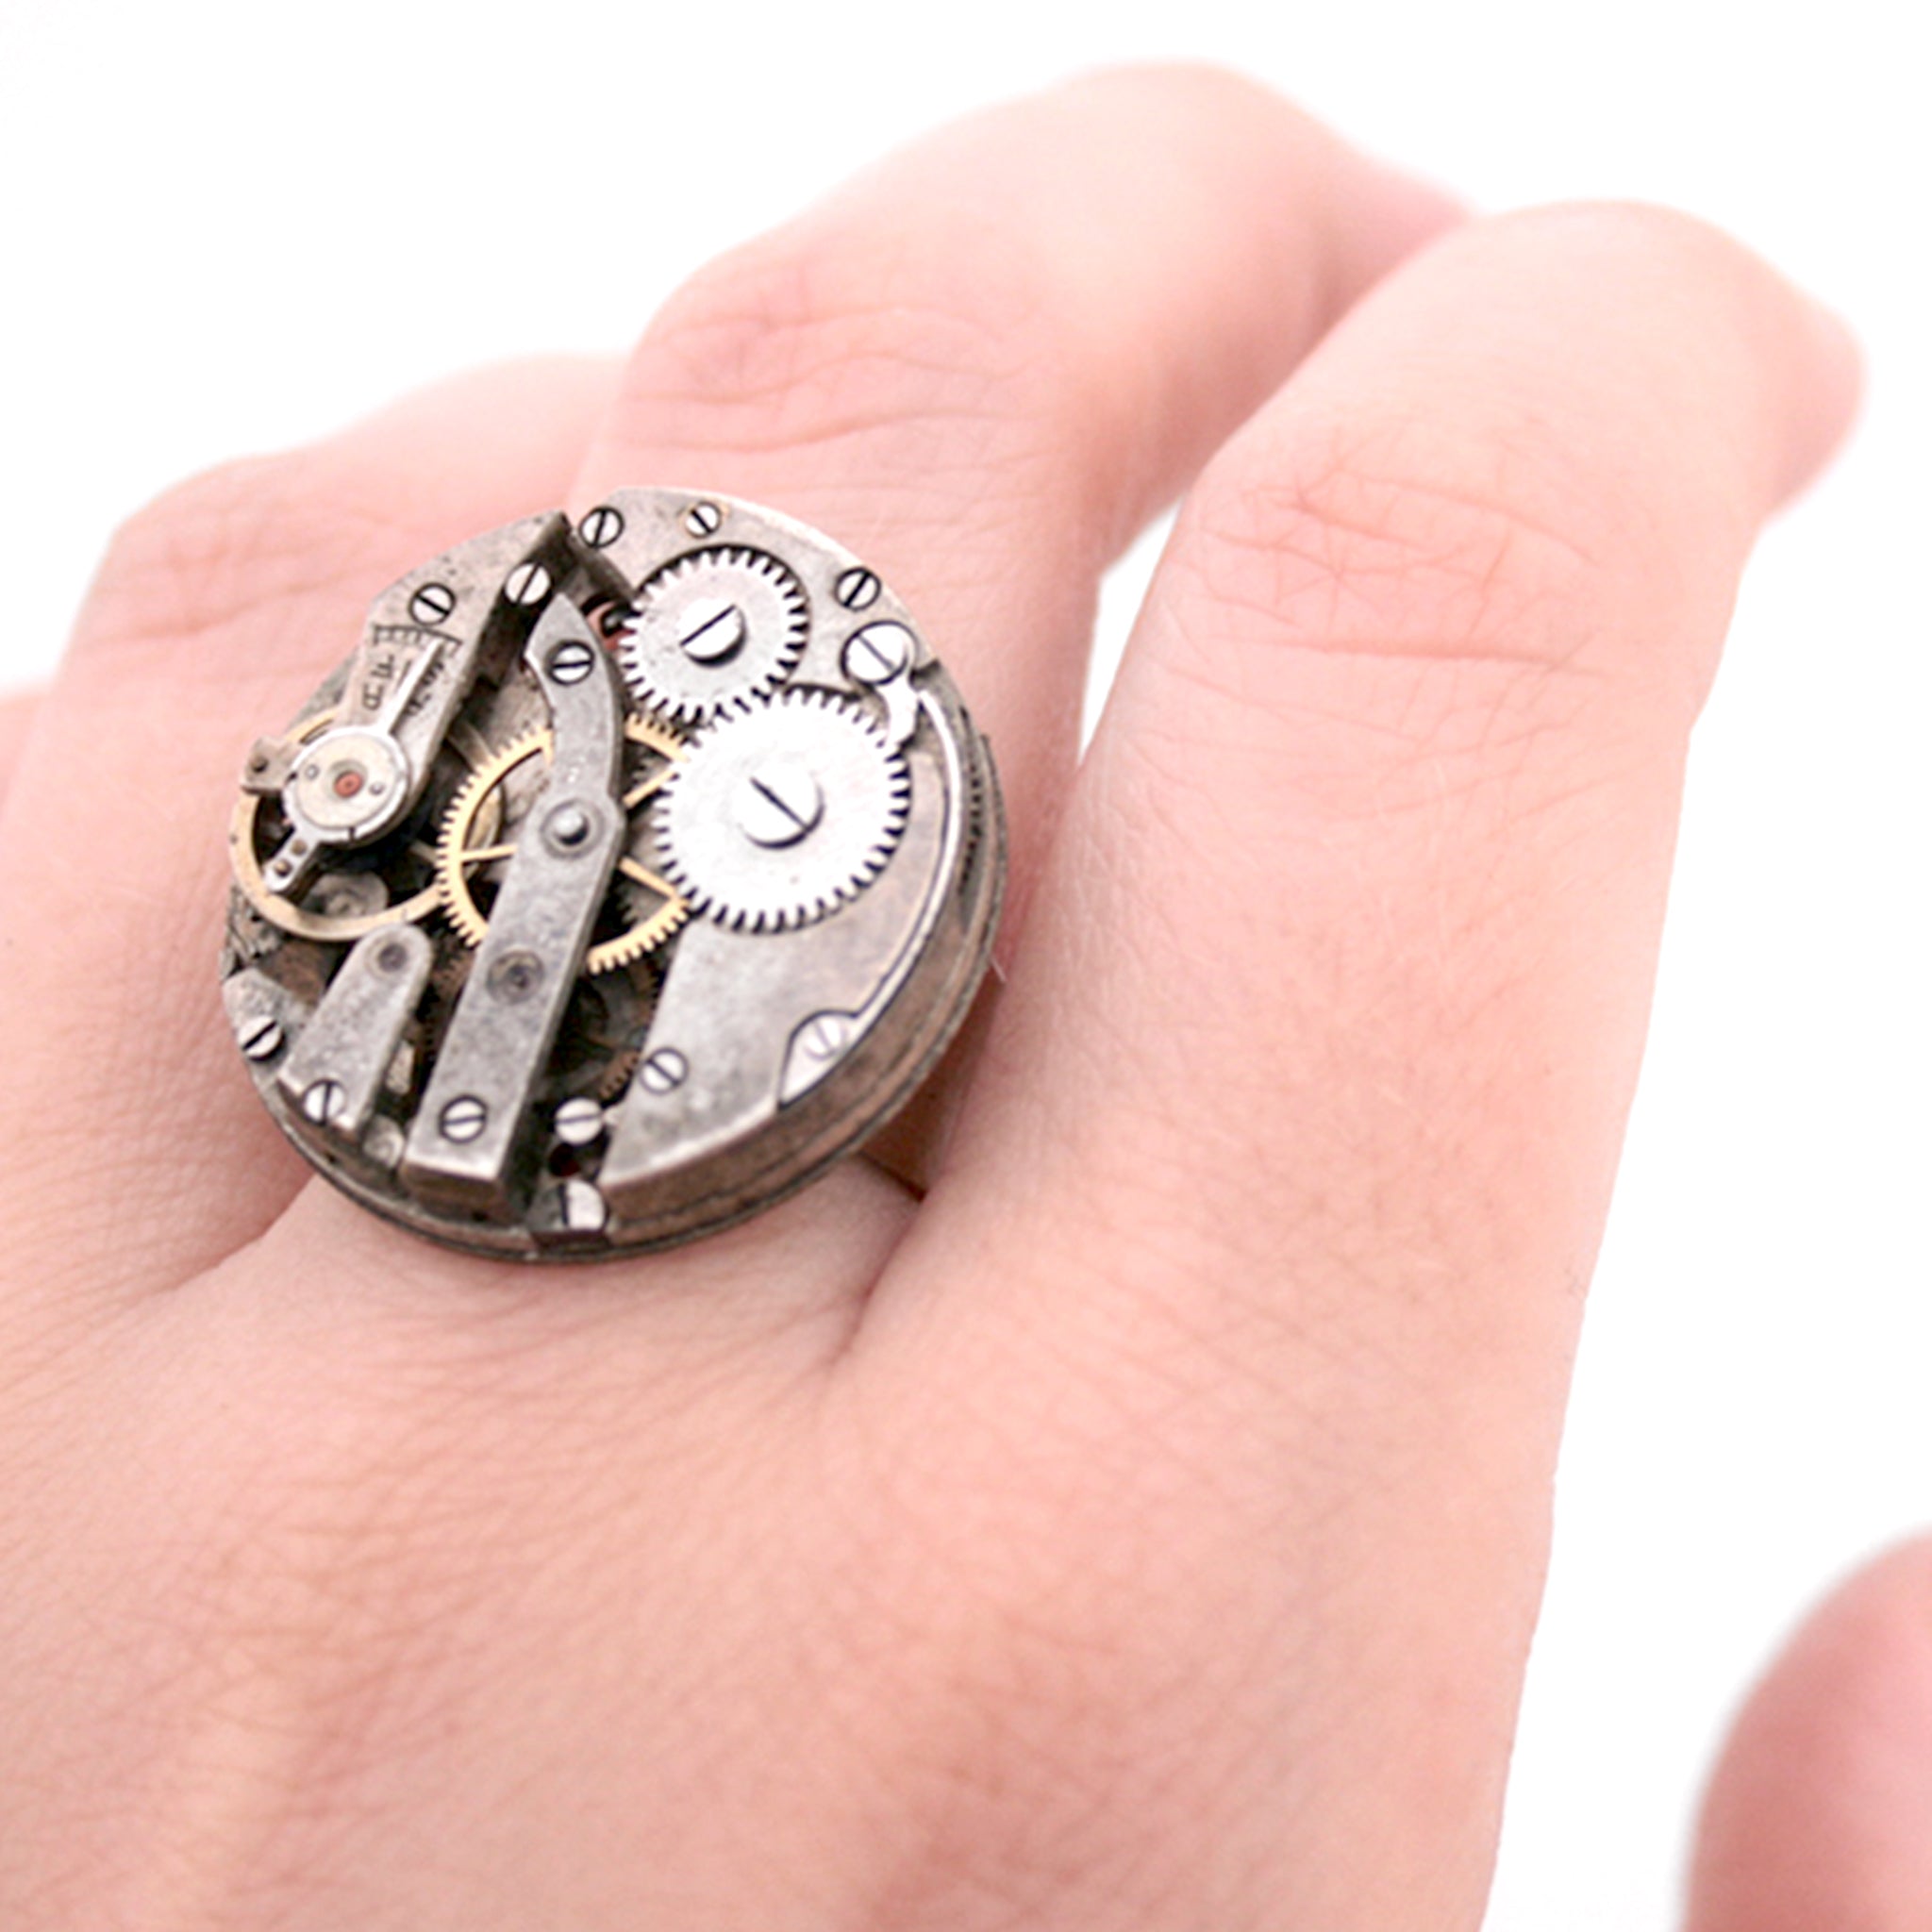 Gothic Ring in Old Silver made of watch mechanism